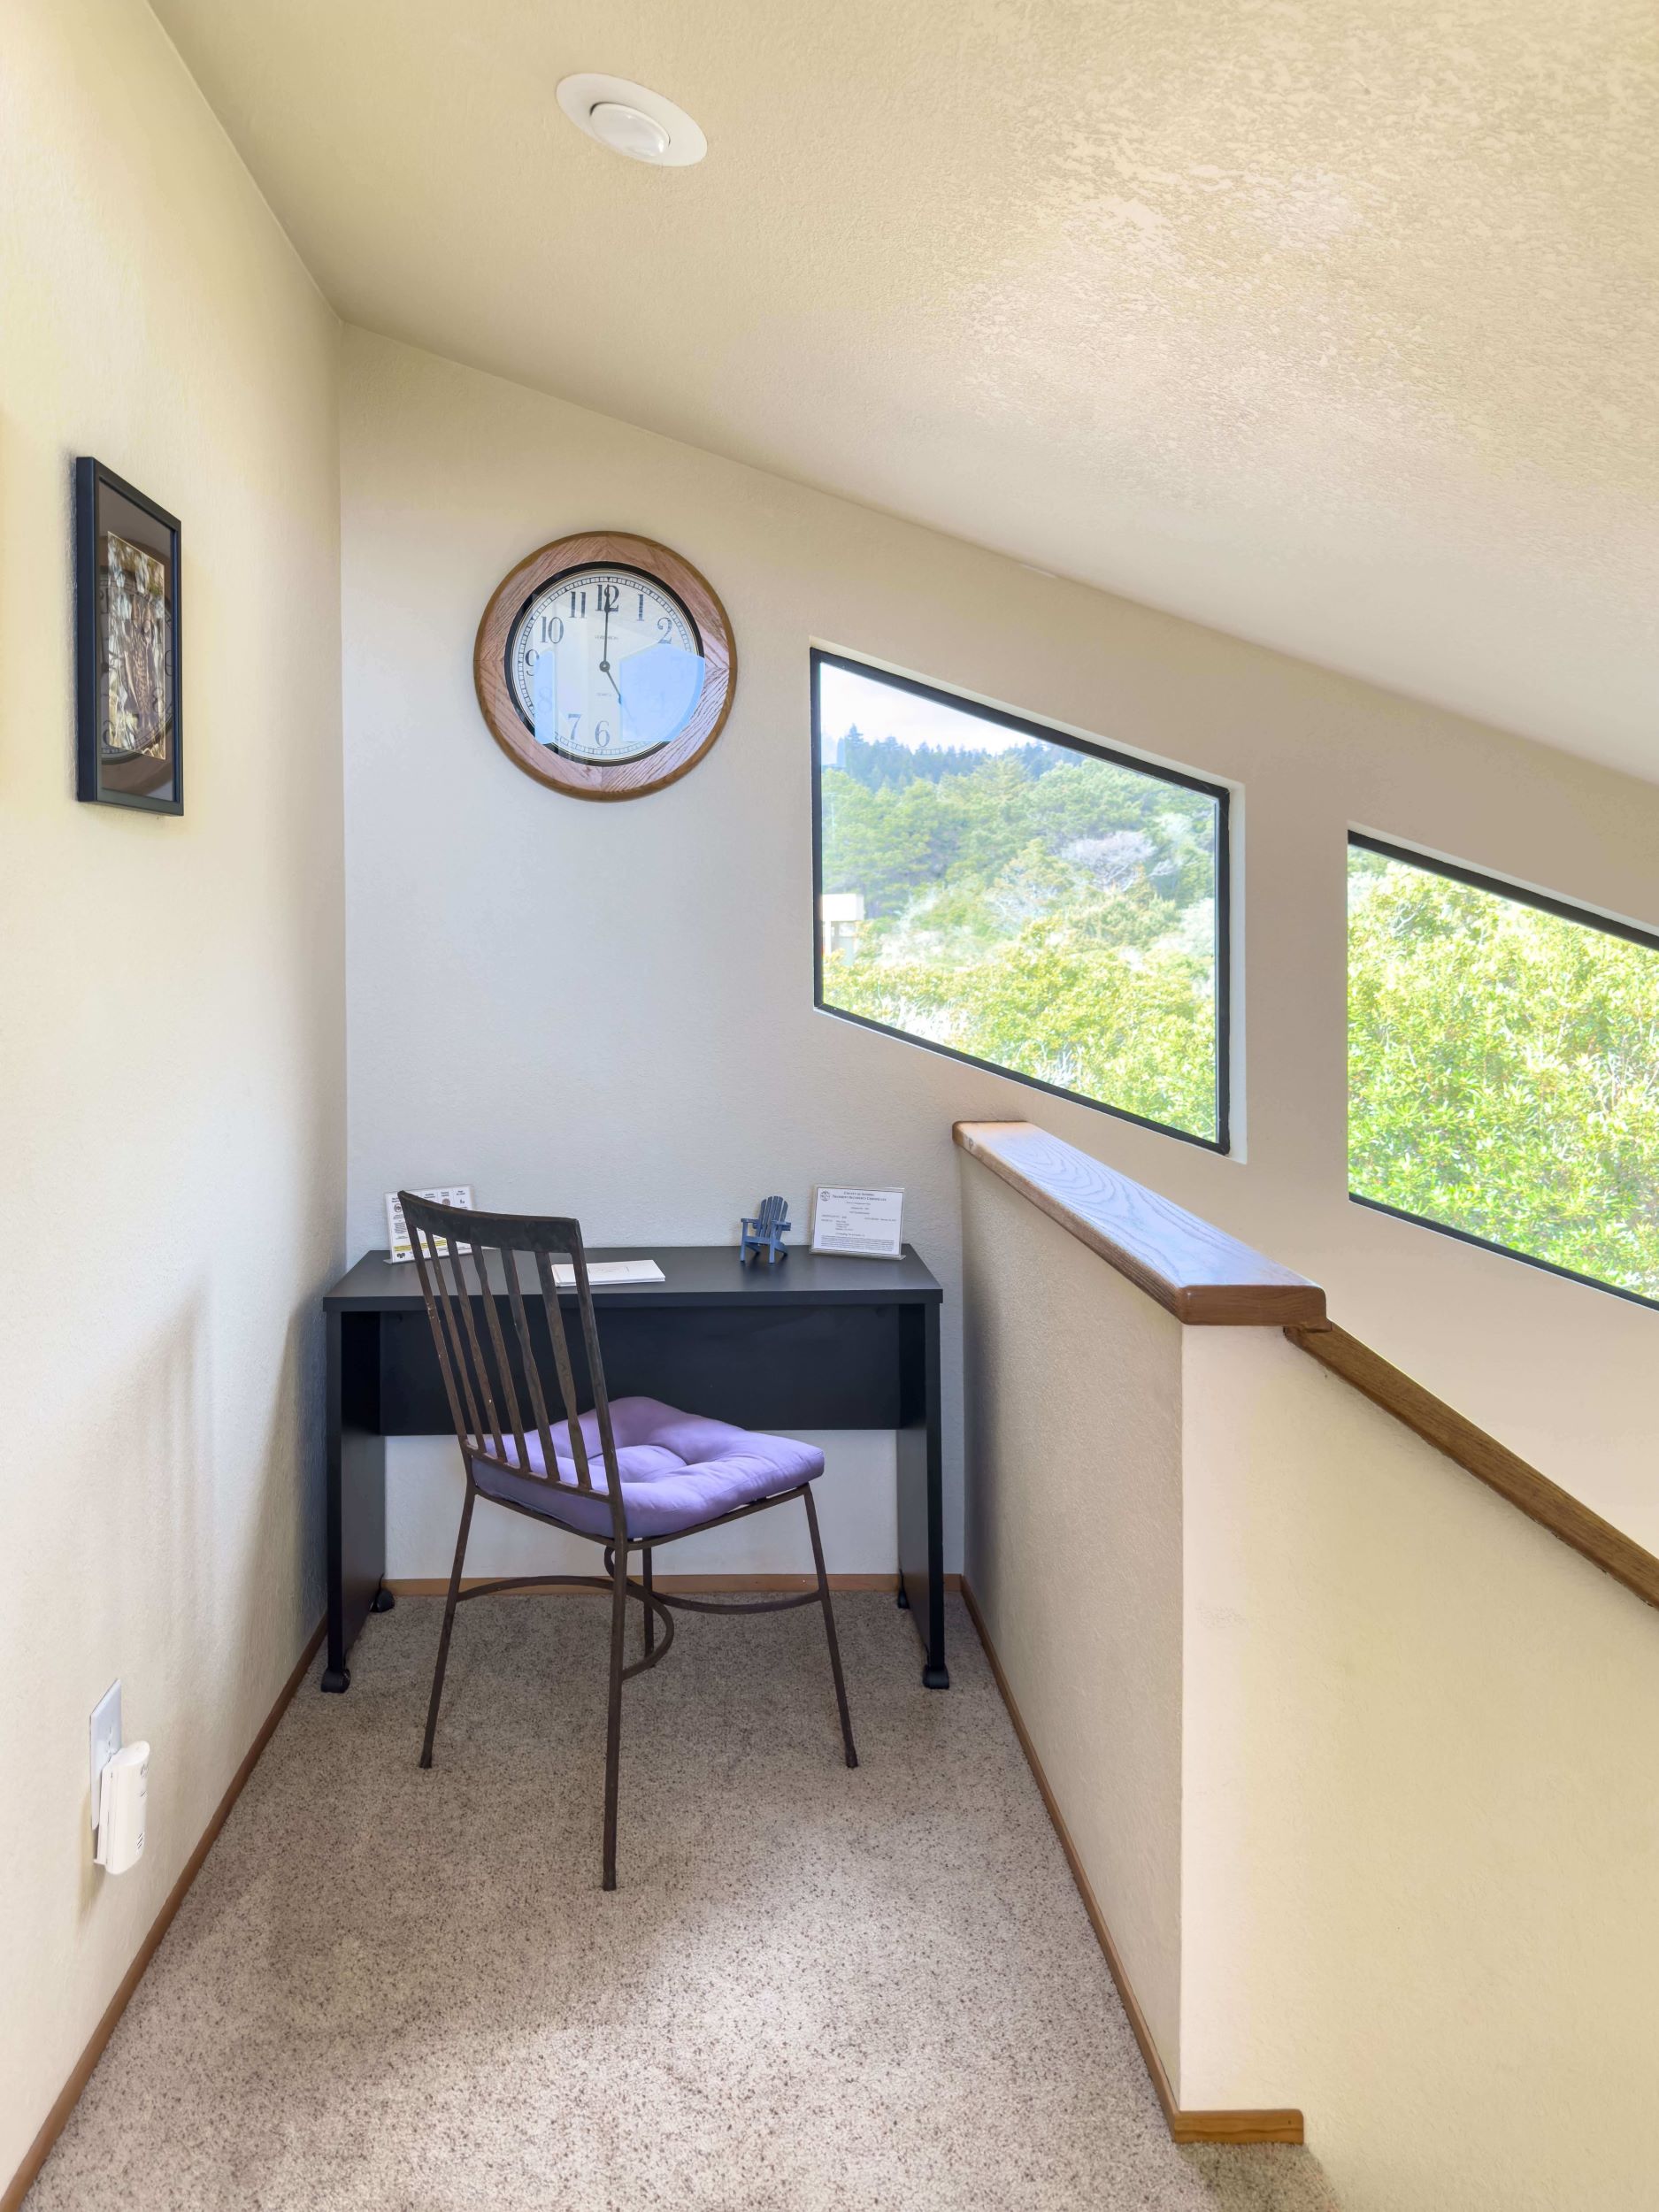 Mare Vista - bright stair landing with small desk and chair on carpet.